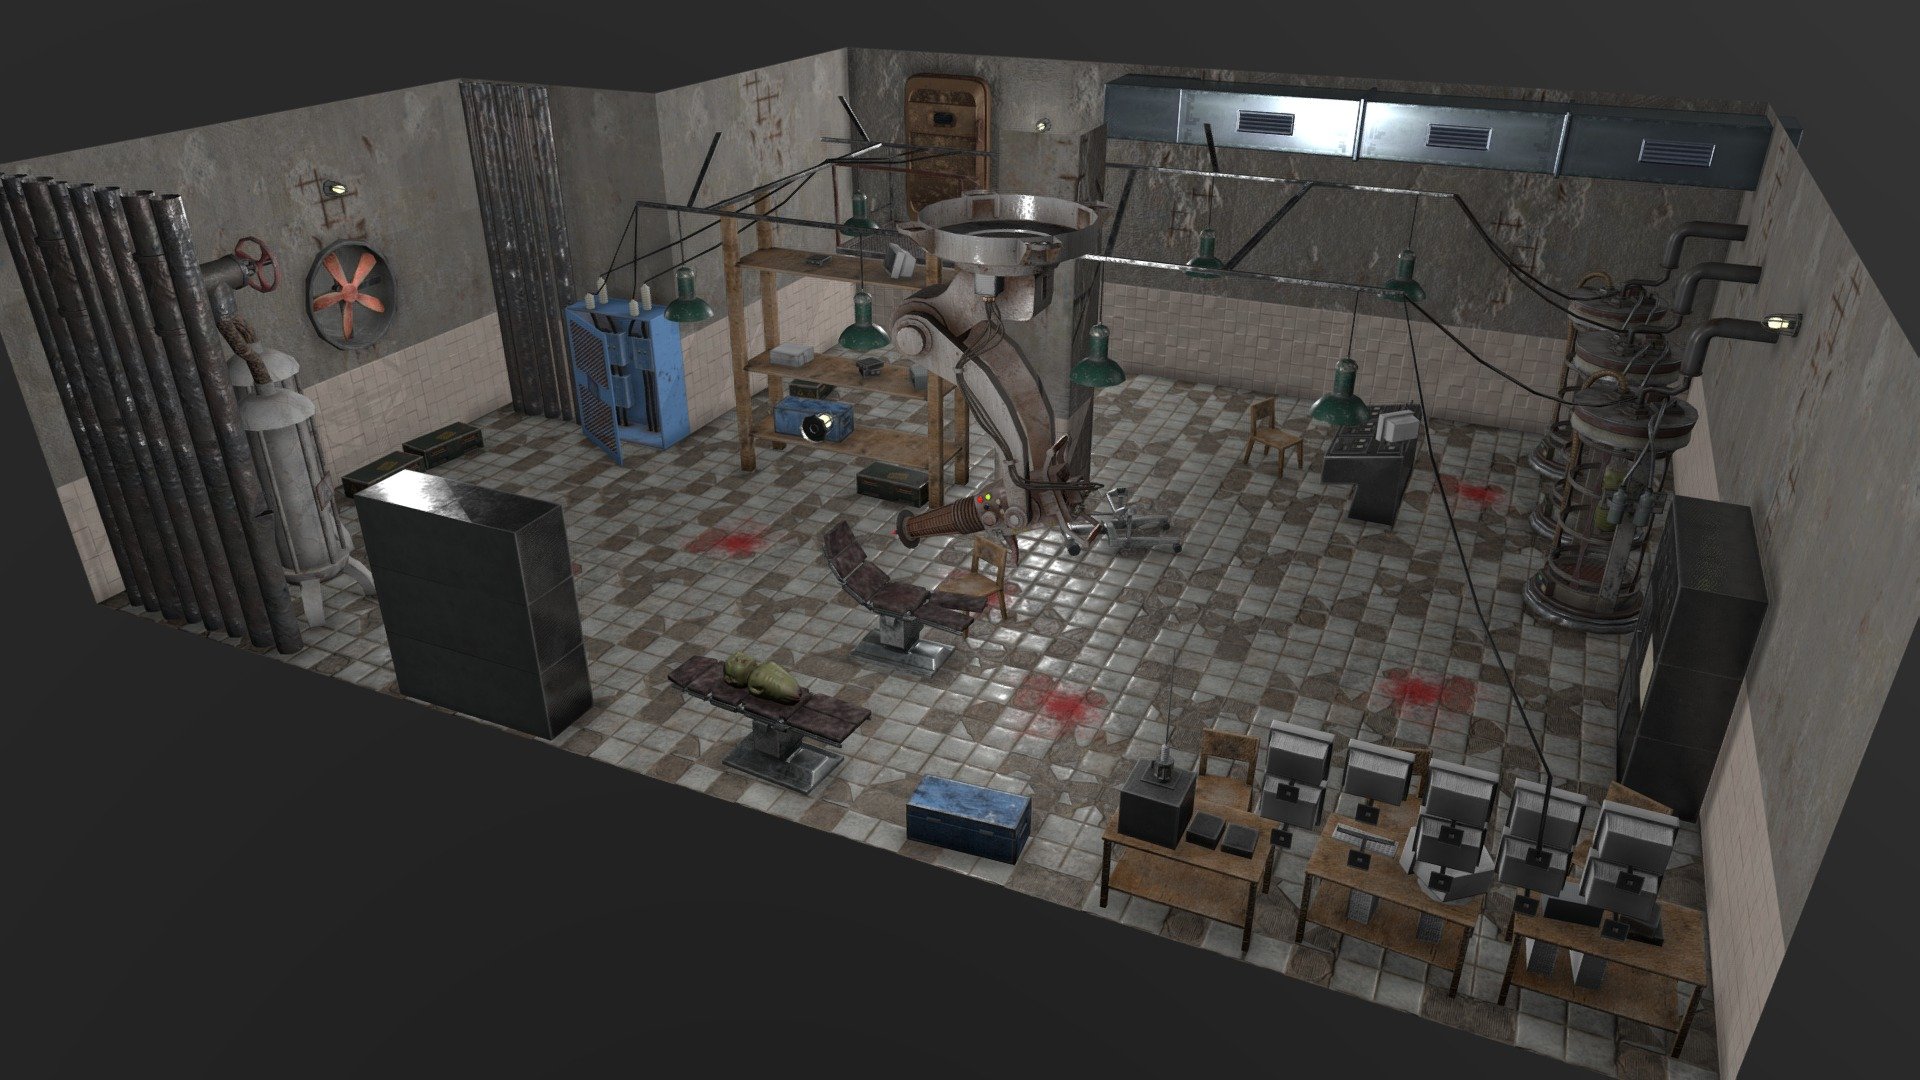 The final stage of our training at the polygon school.by was the study of pbr texturing. For our work, we chose a sinister laboratory in the style of the STALKER computer game.
I created this location, as well as the items in it. I also installed models created by my classmates. And in the end, I edited a video that really conveys the atmosphere of this place.
Tatiana Lyskovets (https://www.artstation.com/tanyl) created a mutant placed in a vessel for experiments.
Arciom Shaukovich (https://www.artstation.com/arshel) created a laser for performing surgical operations.
Vladimir Moroz created an operating table. 
https://www.artstation.com/artwork/0nRe0y - Evillab - 3D model by senya.frozenov 3d model